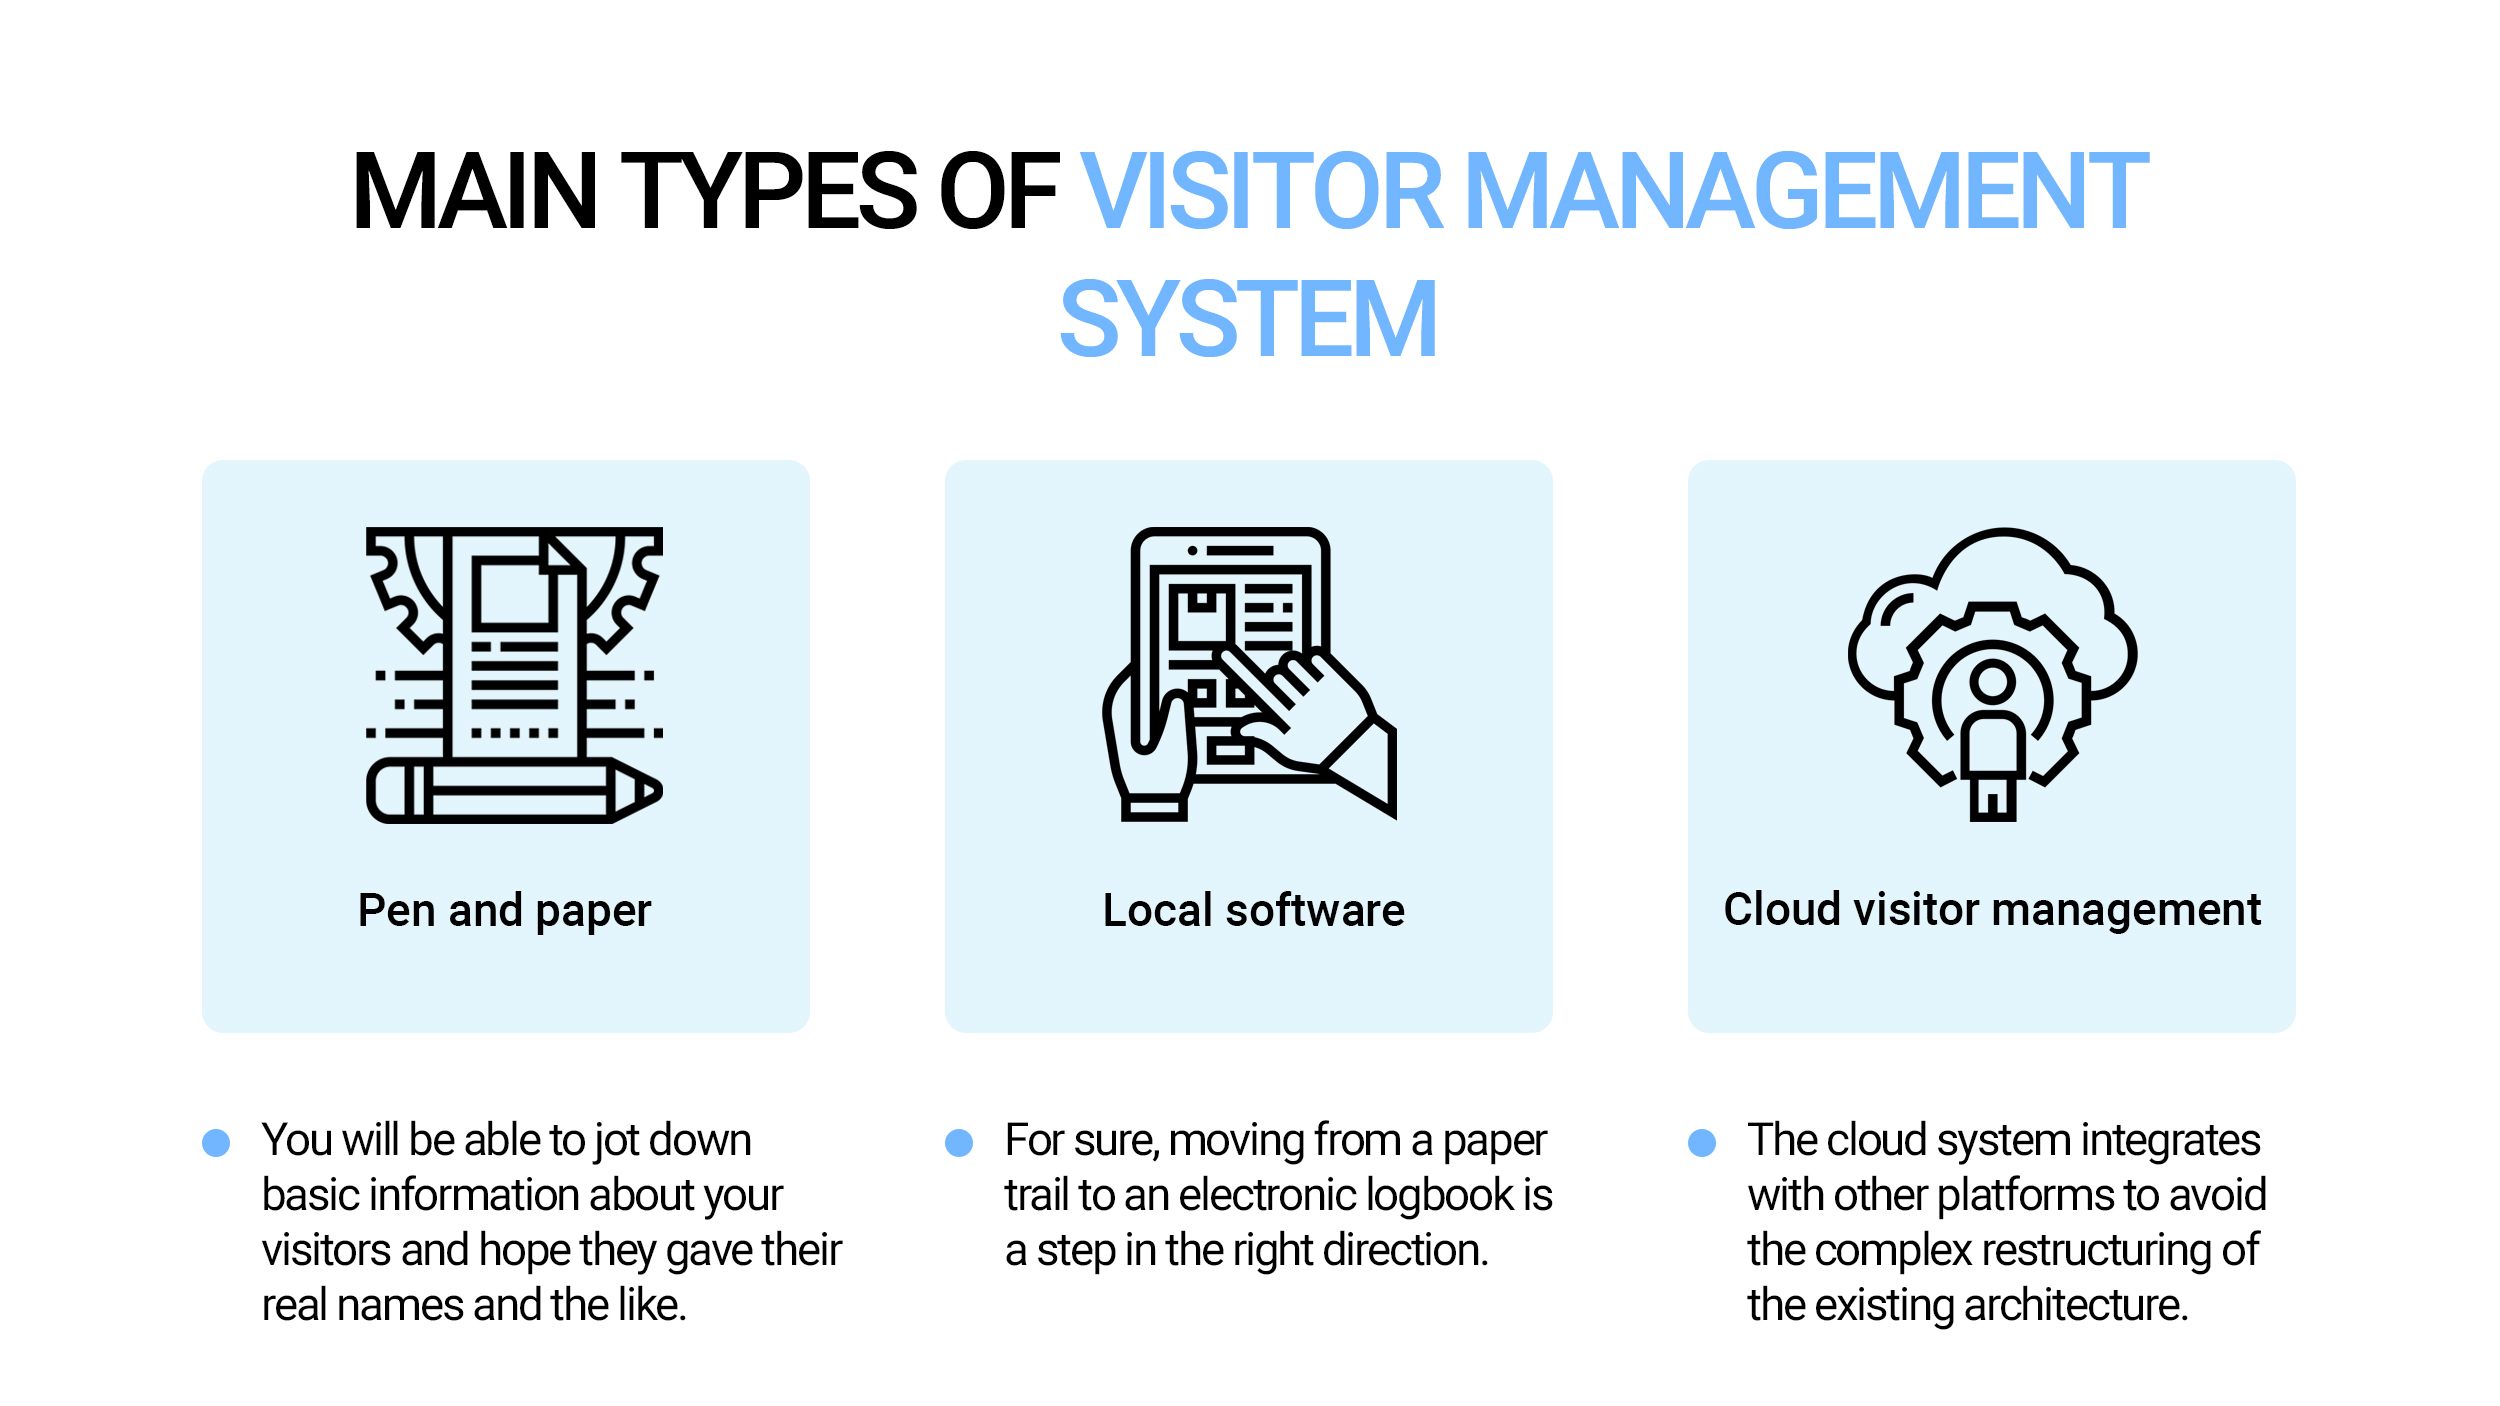 Main Types of Visitor Management System